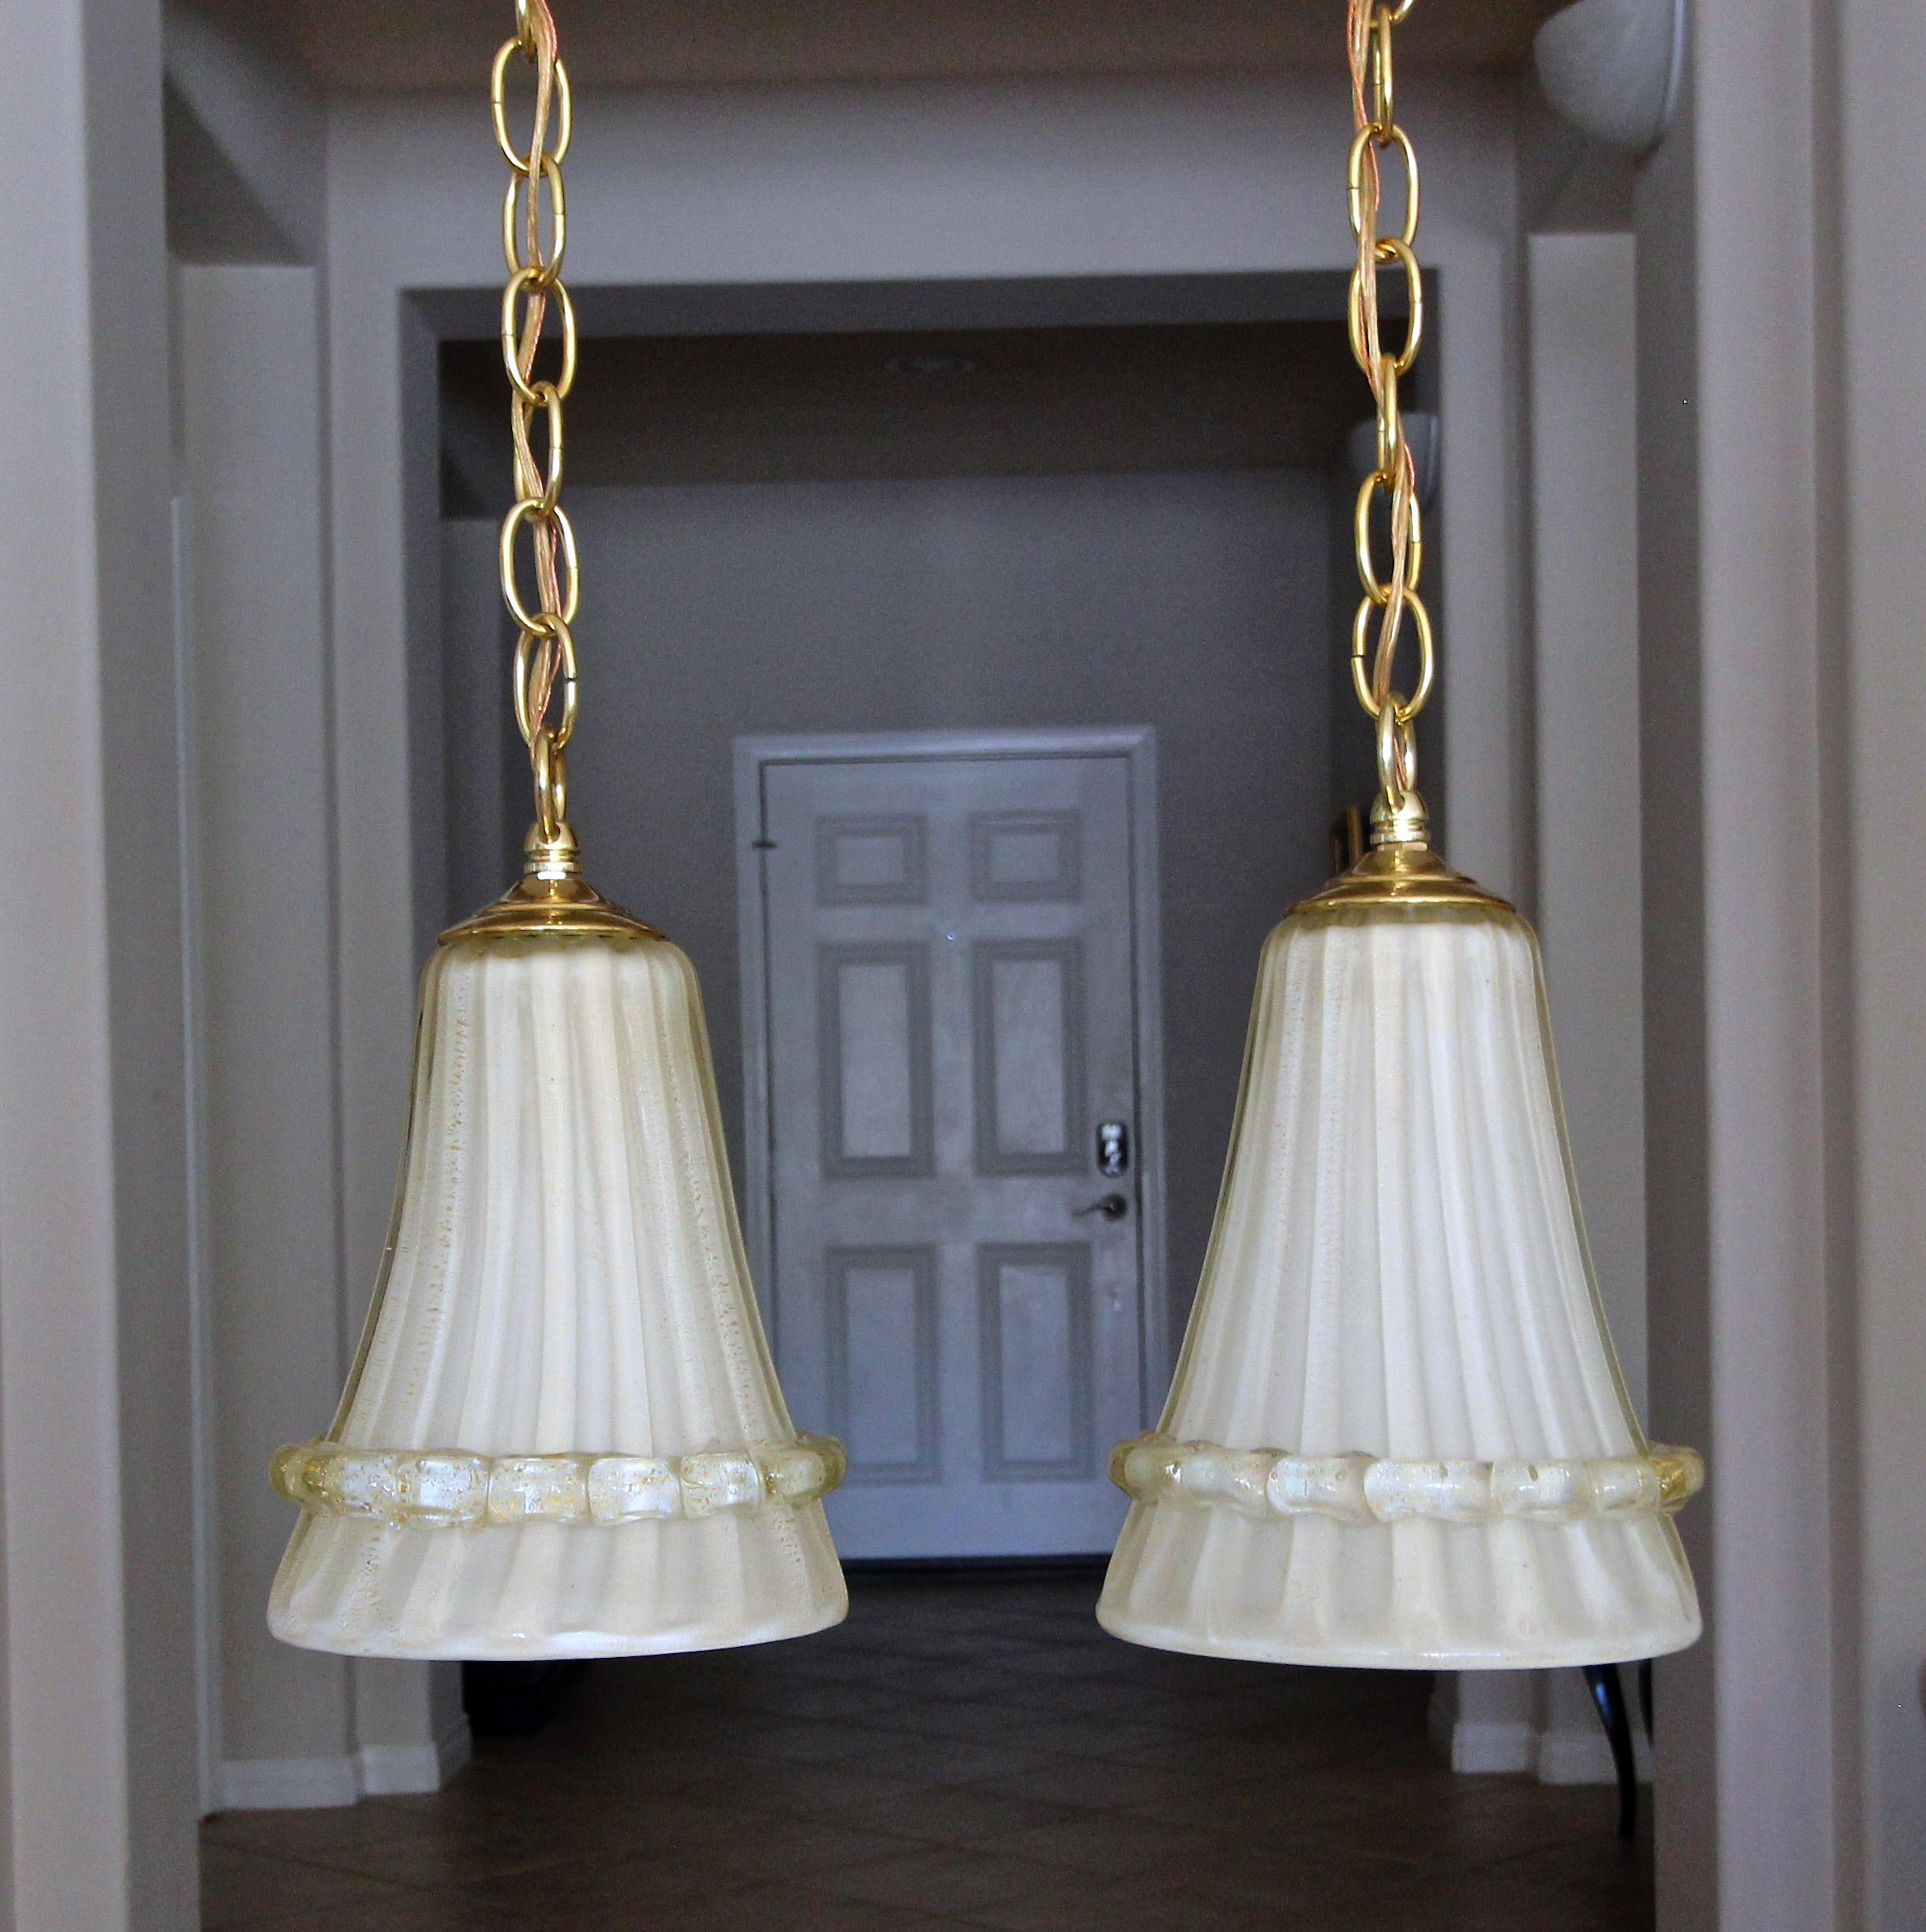 Pair of Italian handblown glass cream colored with gold inclusions ceiling pendants lights. Each suspended on brass chain and ceiling. Newly wired with all new brass fittings, each uses single candelabra size bulb. Size of pendant 9